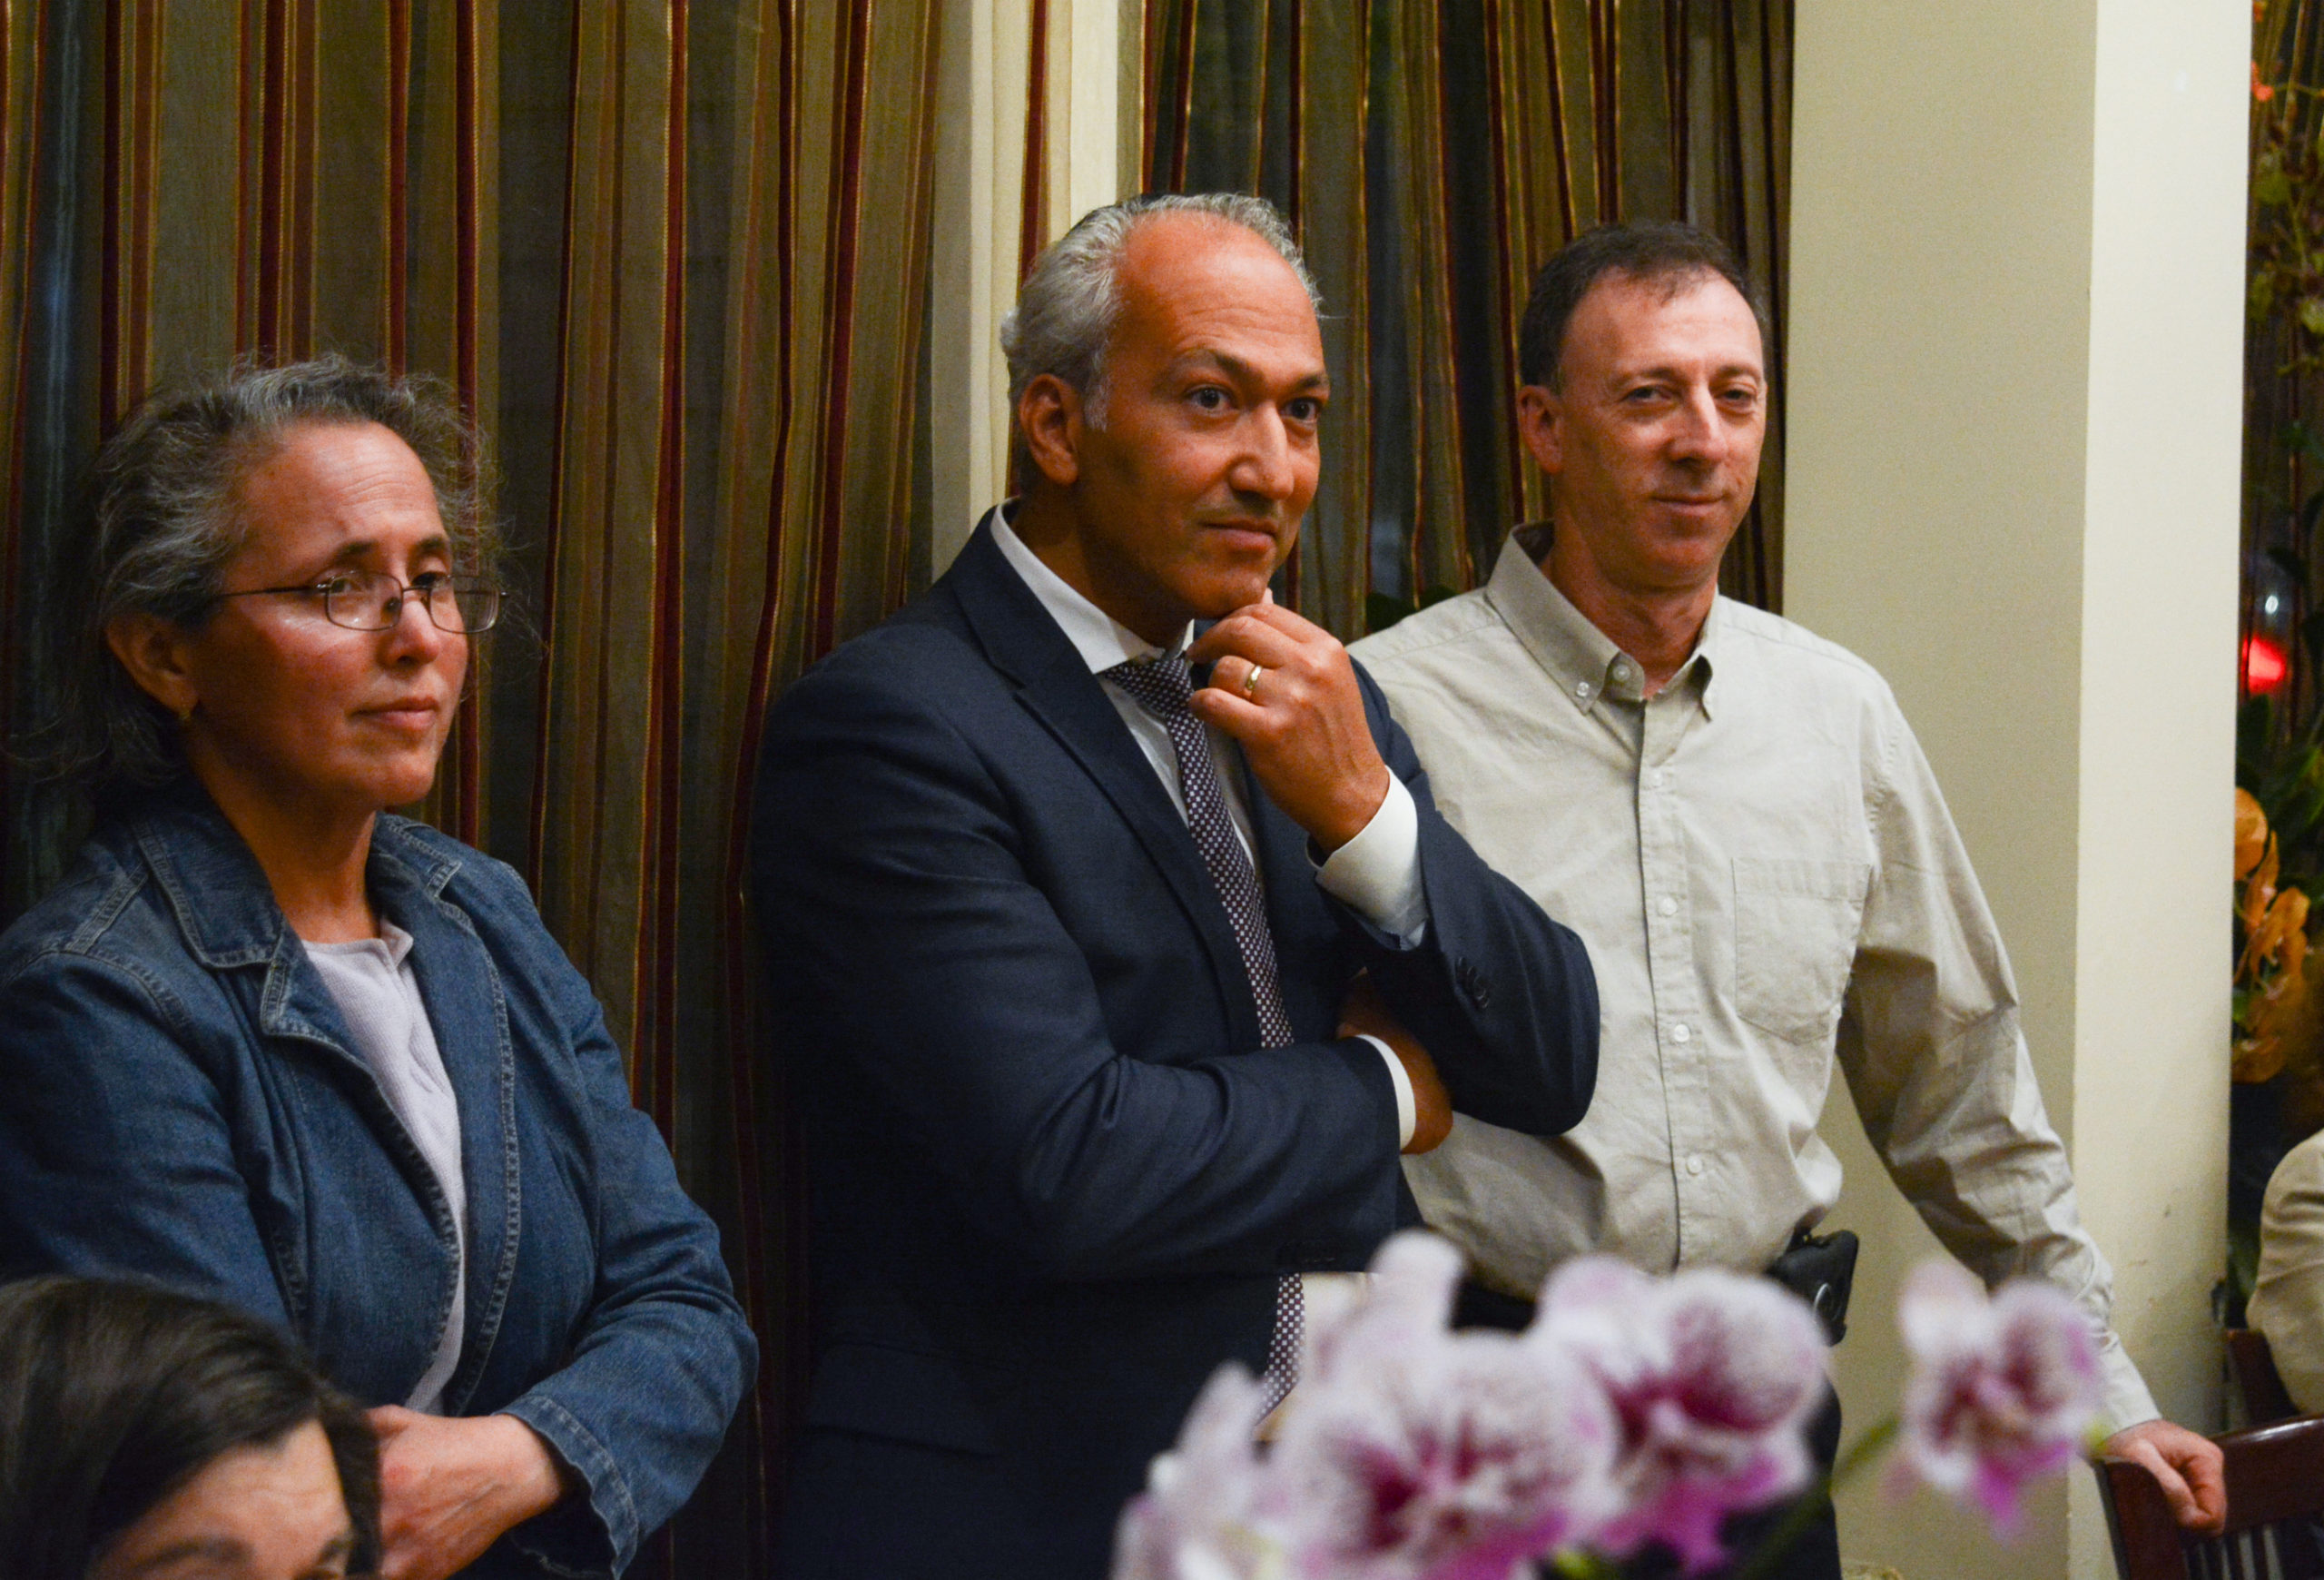 Annie Mendelson, Pedram Bral and Steven Hope appeared at a forum at Shiraz one week before the election. (Photo by Janelle Clausen)